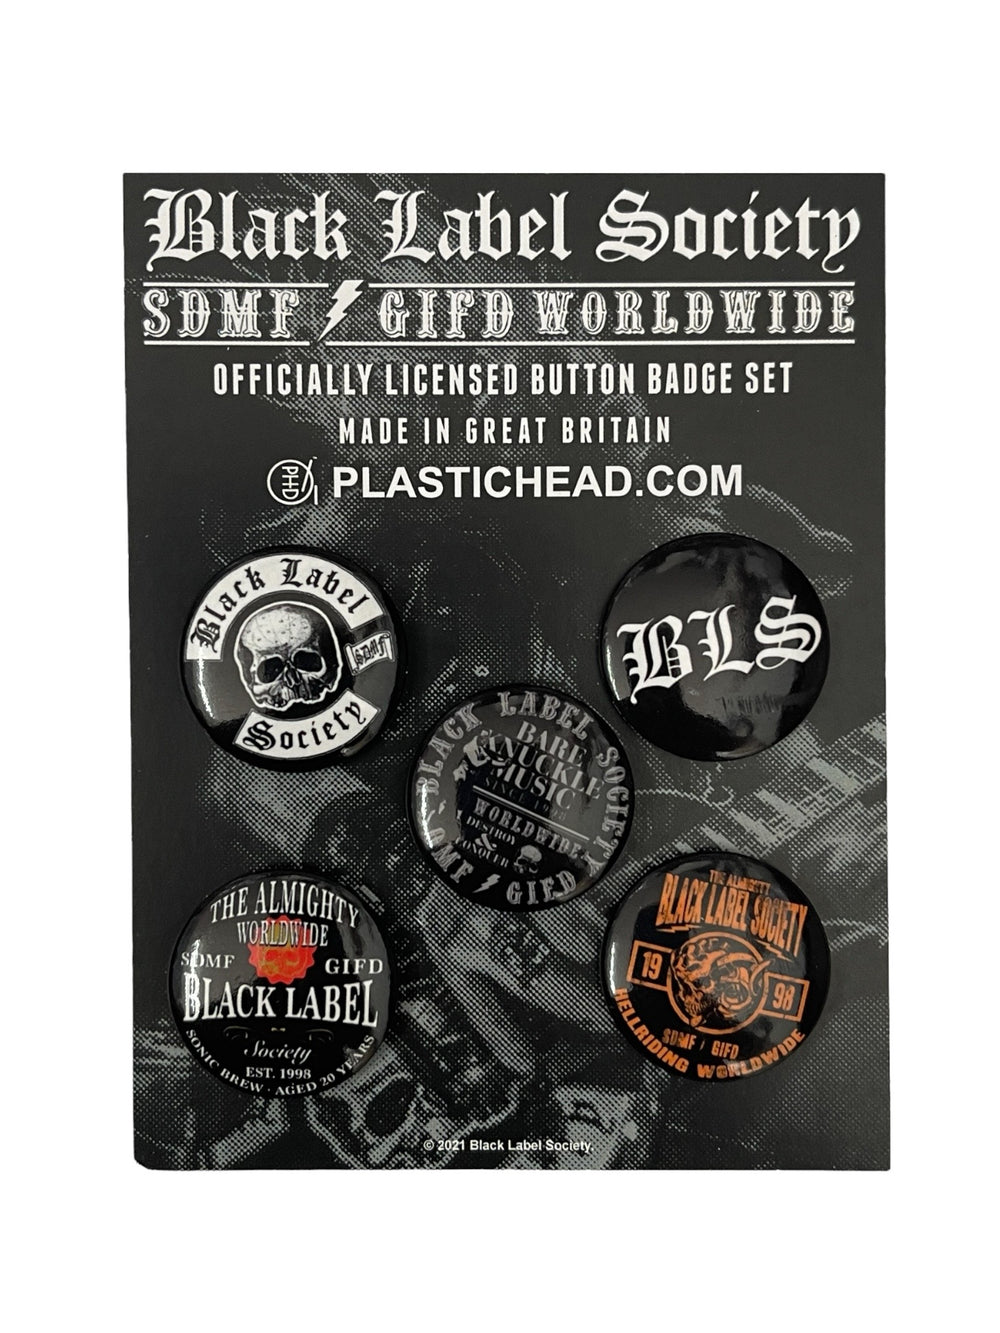 Black label Society Official Merchandise Badge Pack Brand New